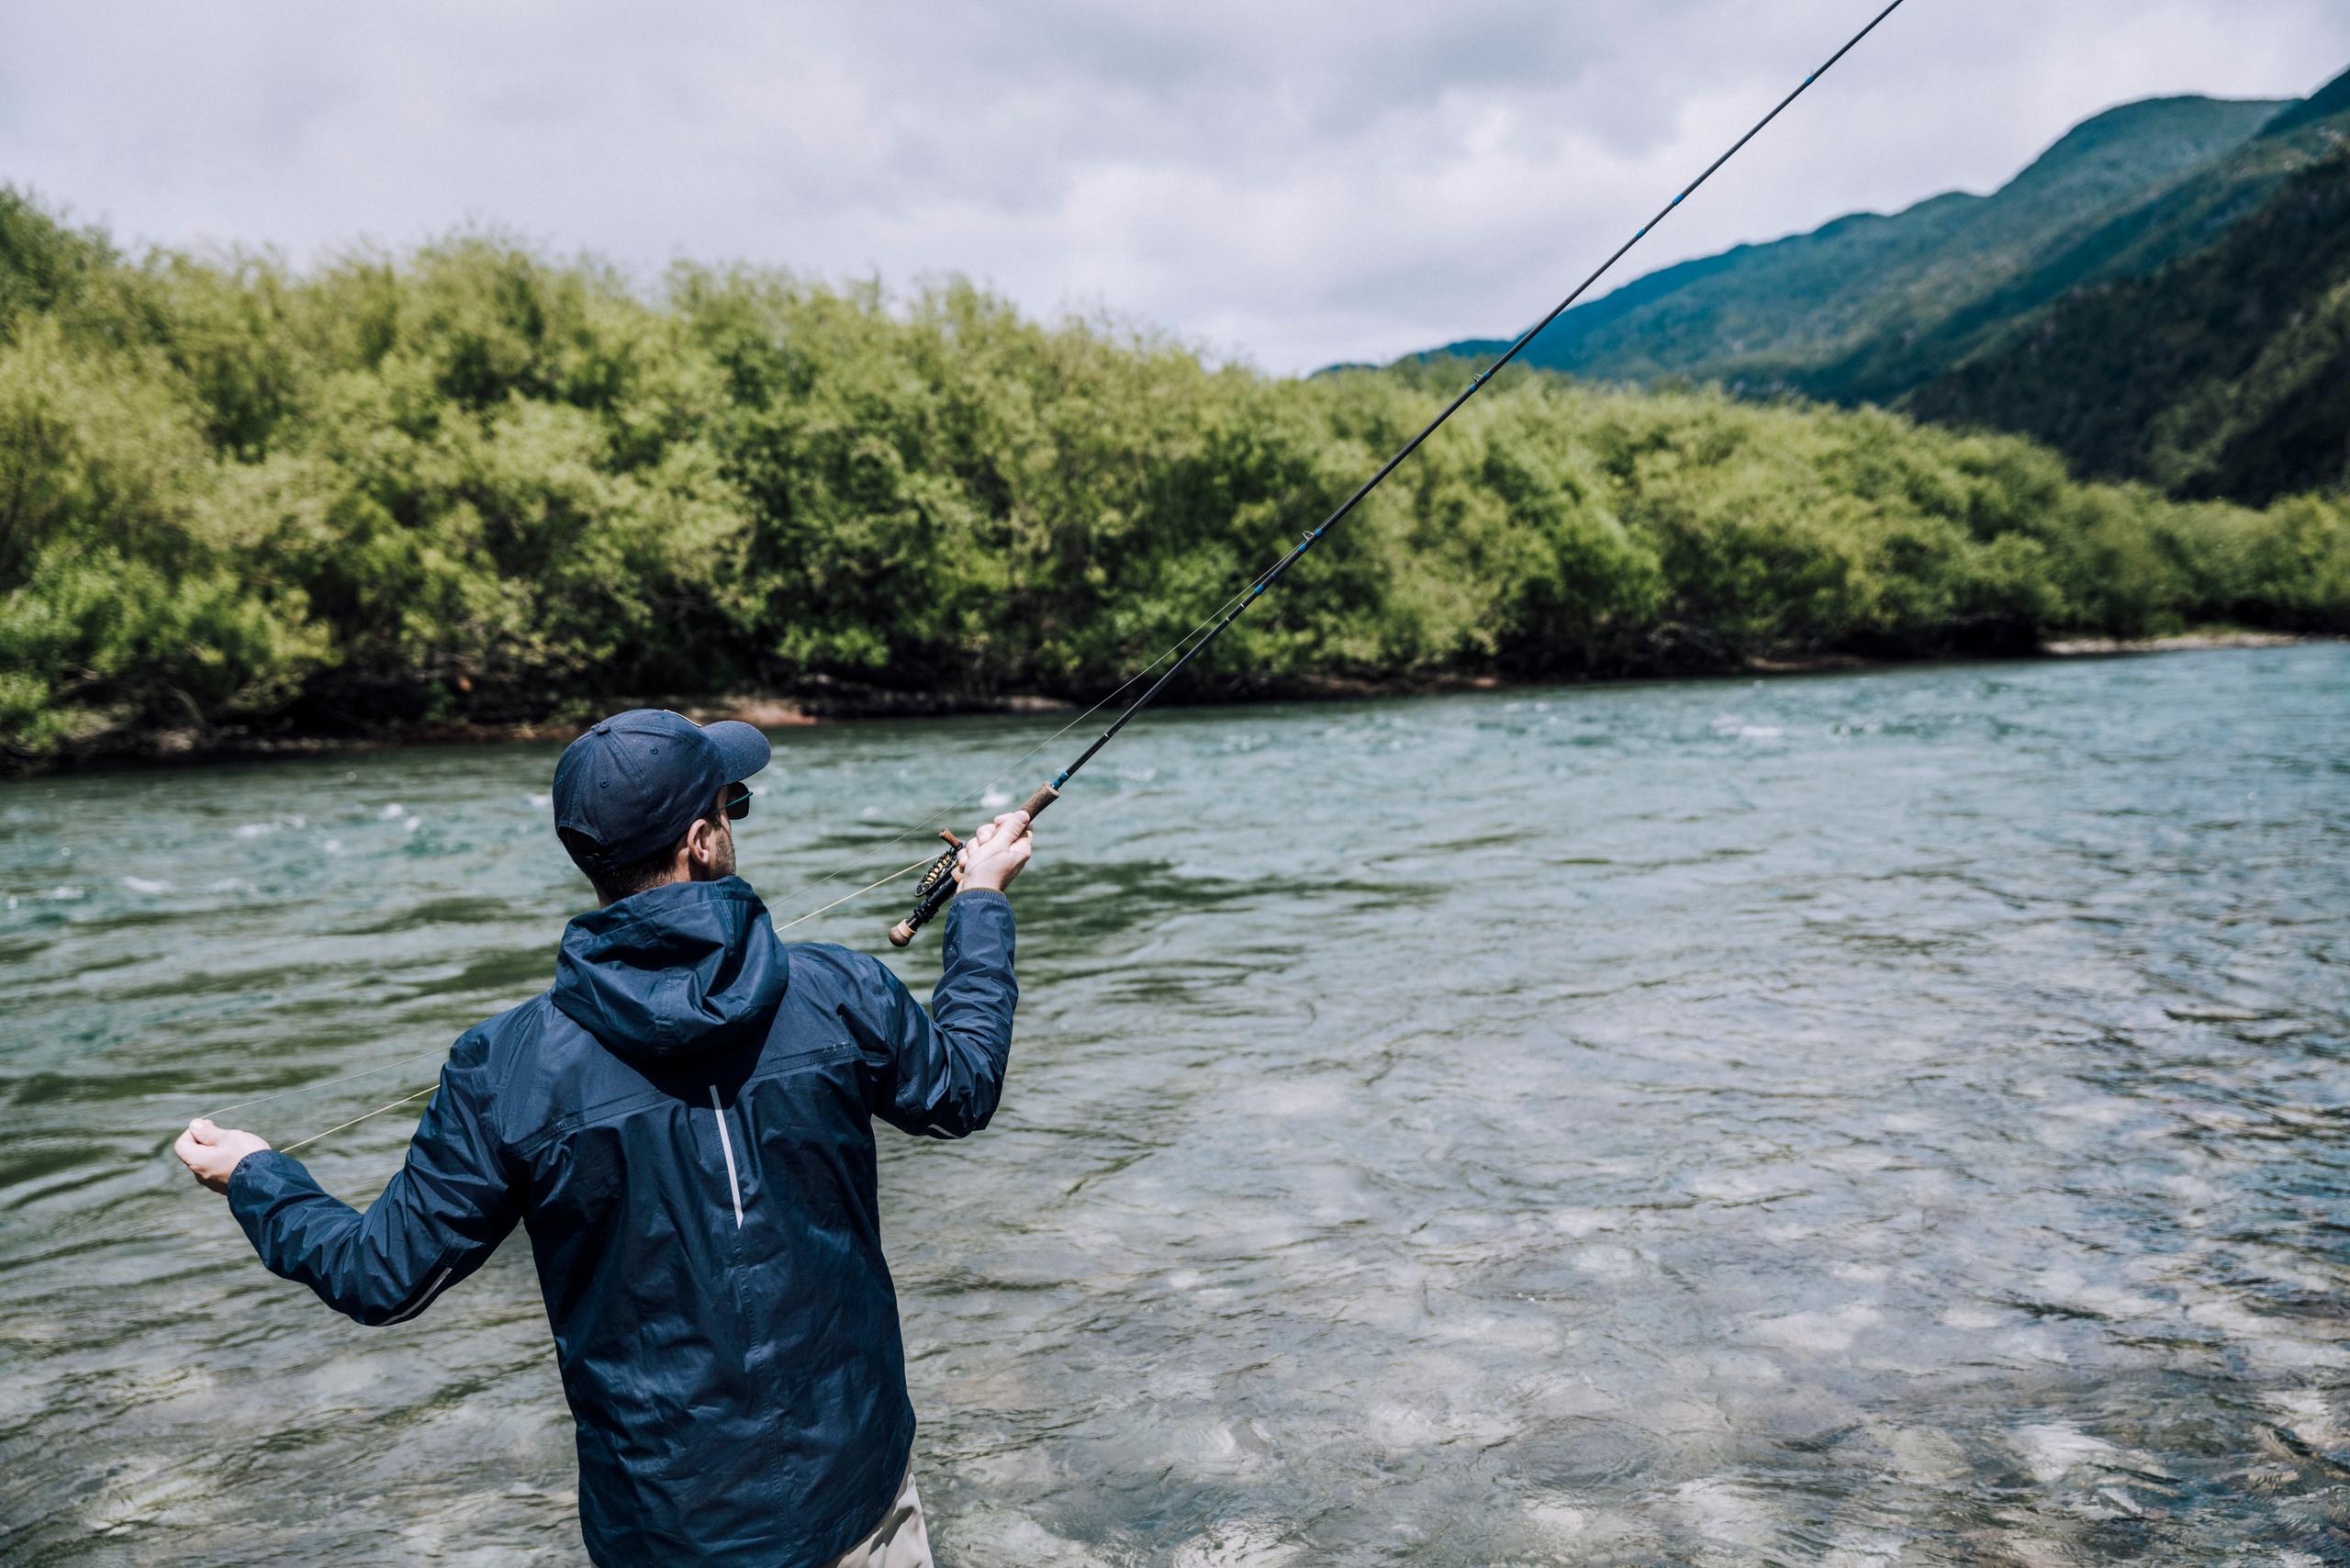 Man in Storm Jacket casting fishing line in Patagonia river